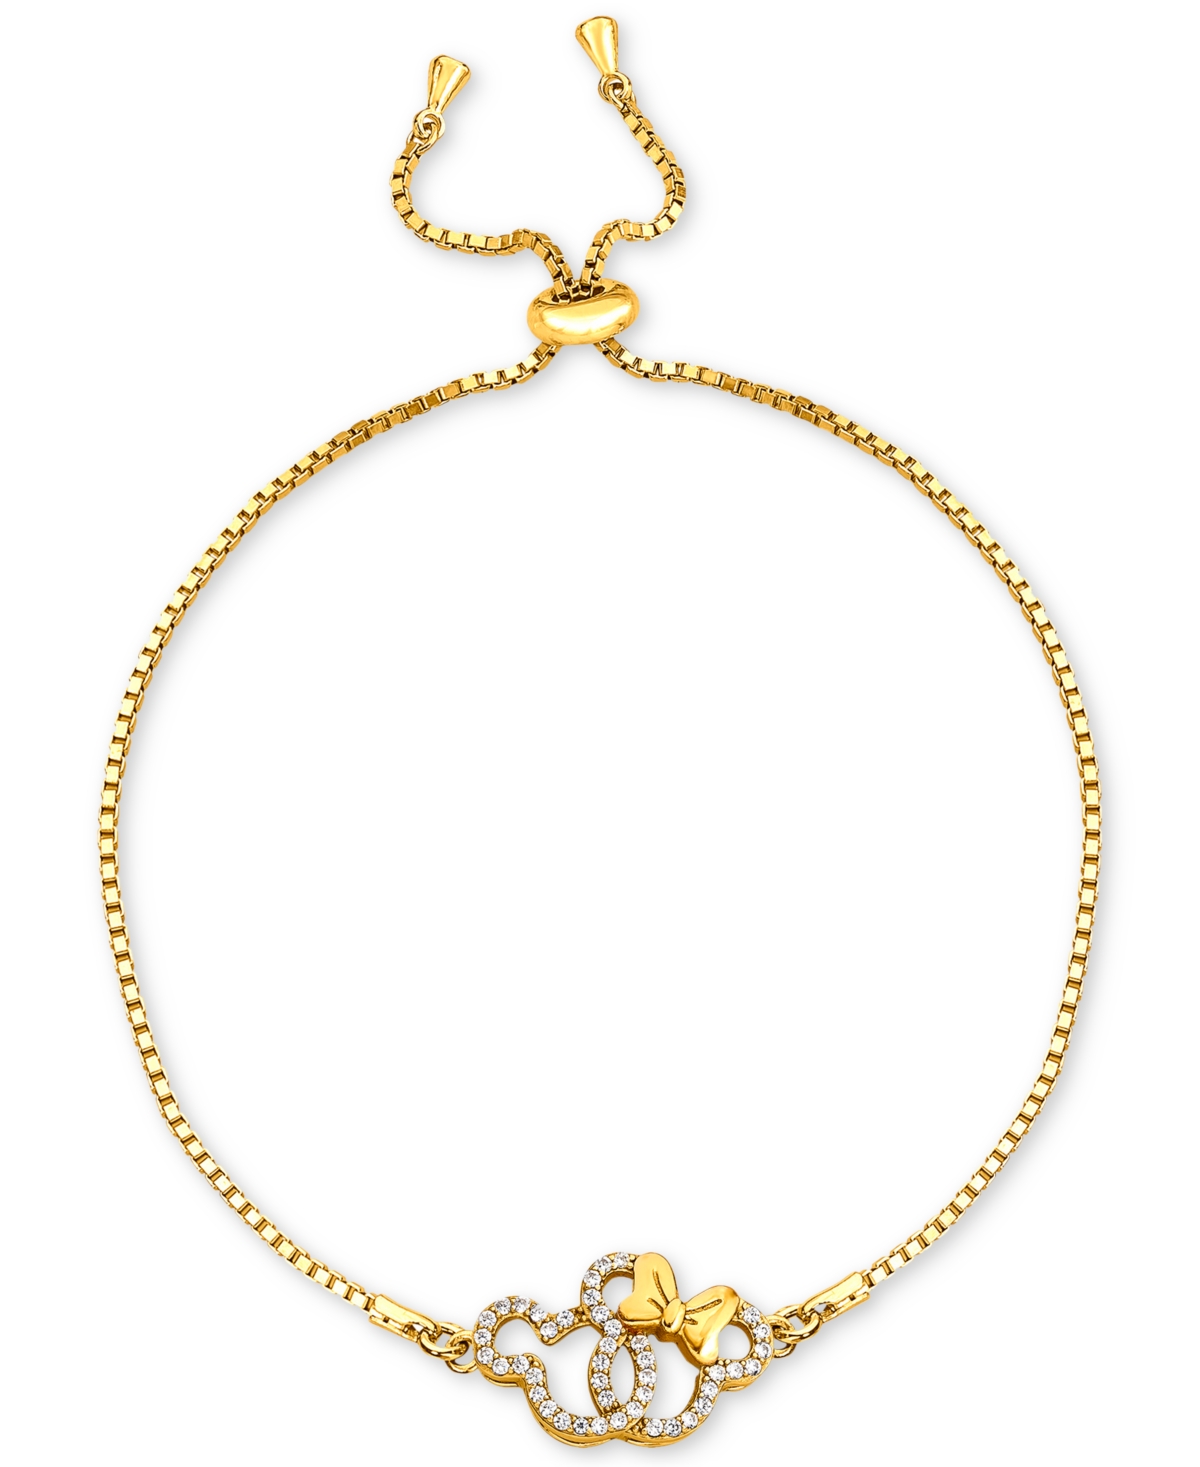 Cubic Zirconia Mickey & Minnie Mouse Interlocking Bolo Bracelet in 18k Gold-Plated Sterling Silver - Gold Over Silver